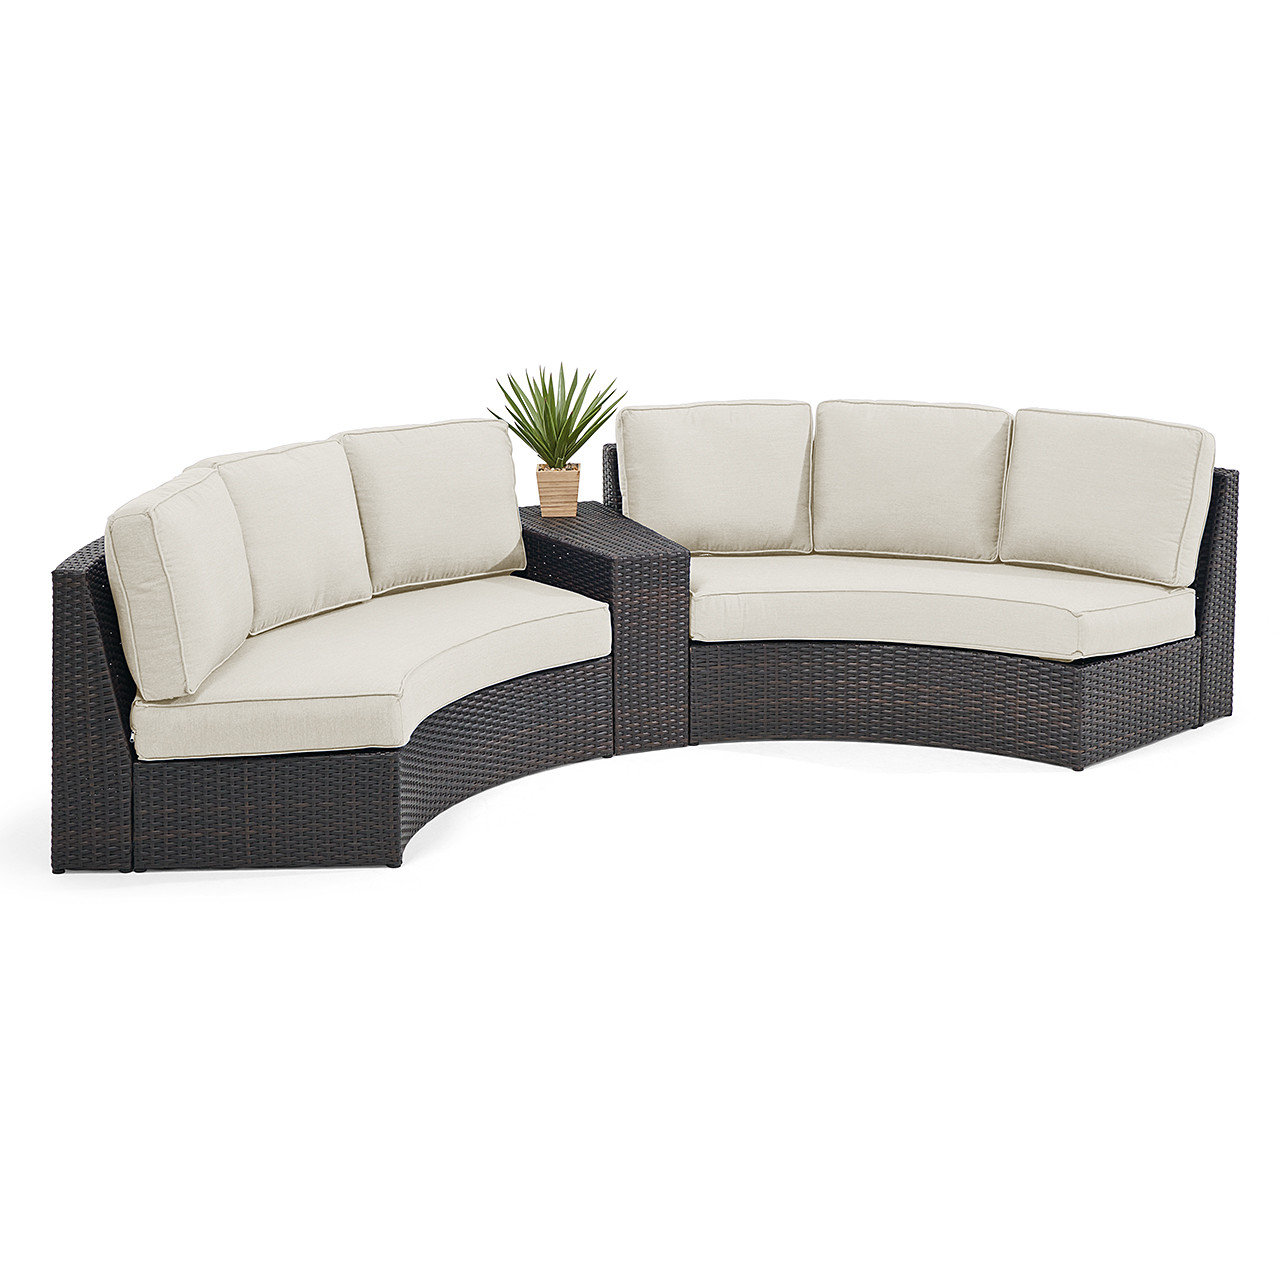 San Lucas Outdoor Wicker with Cushions 3 Piece Contour Sectional